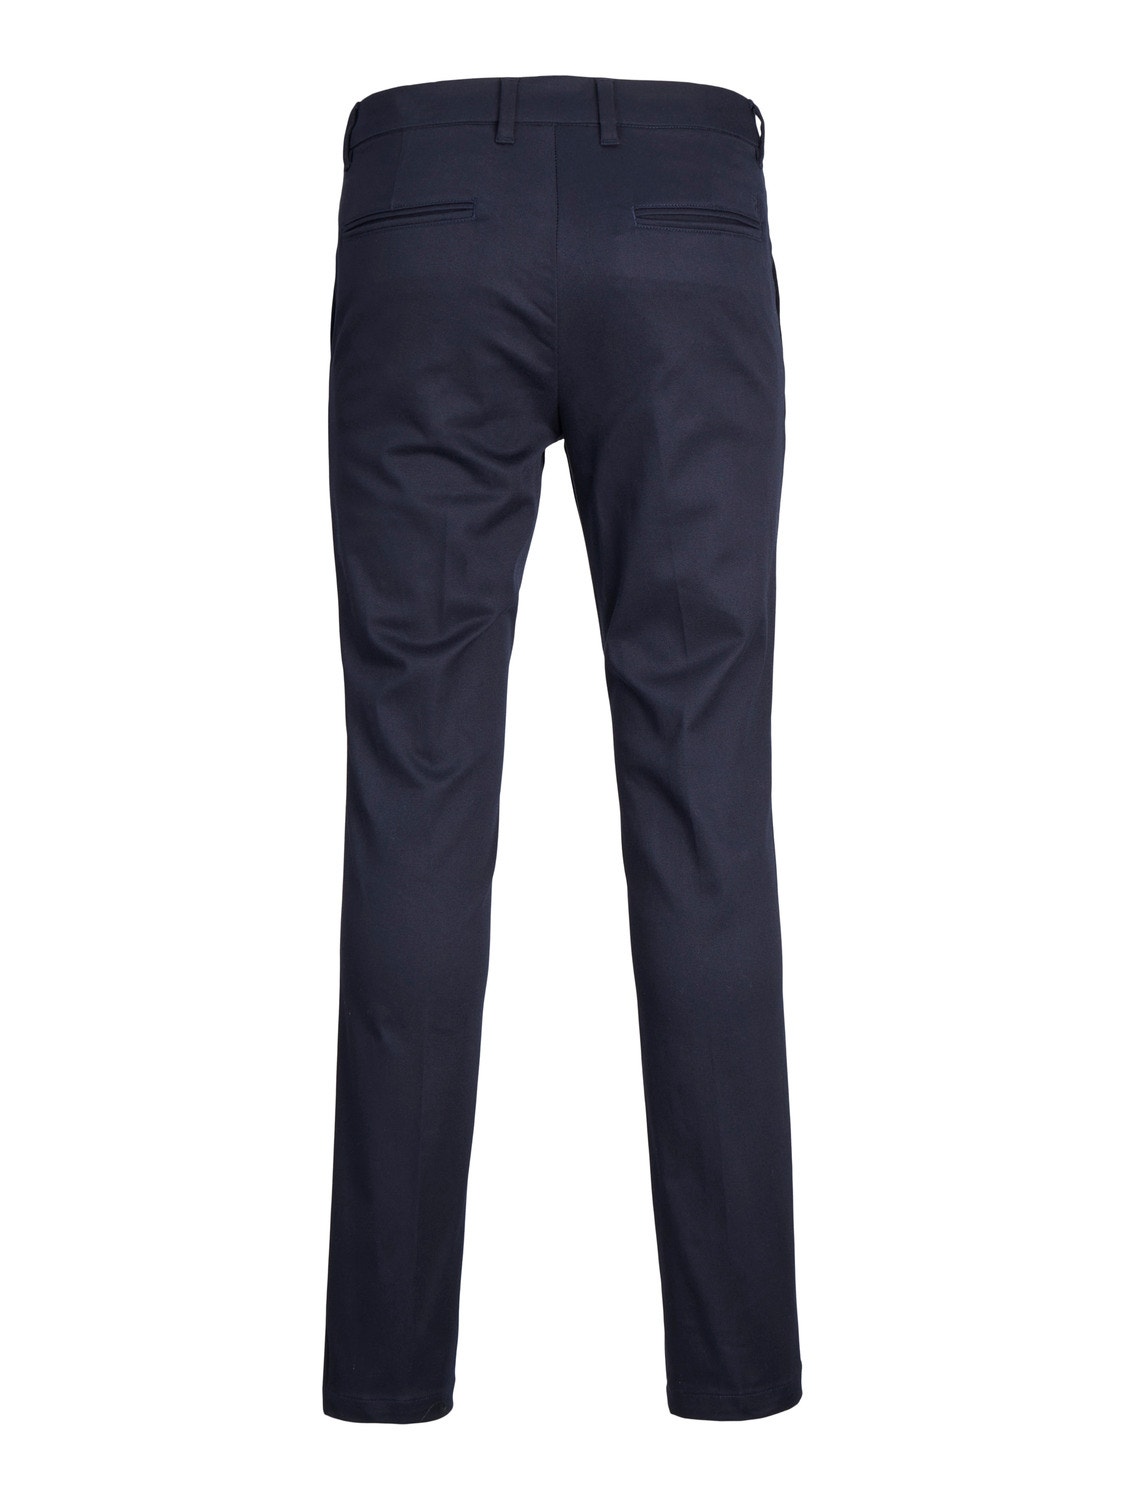 Slim Fit Chino trousers, Light Blue